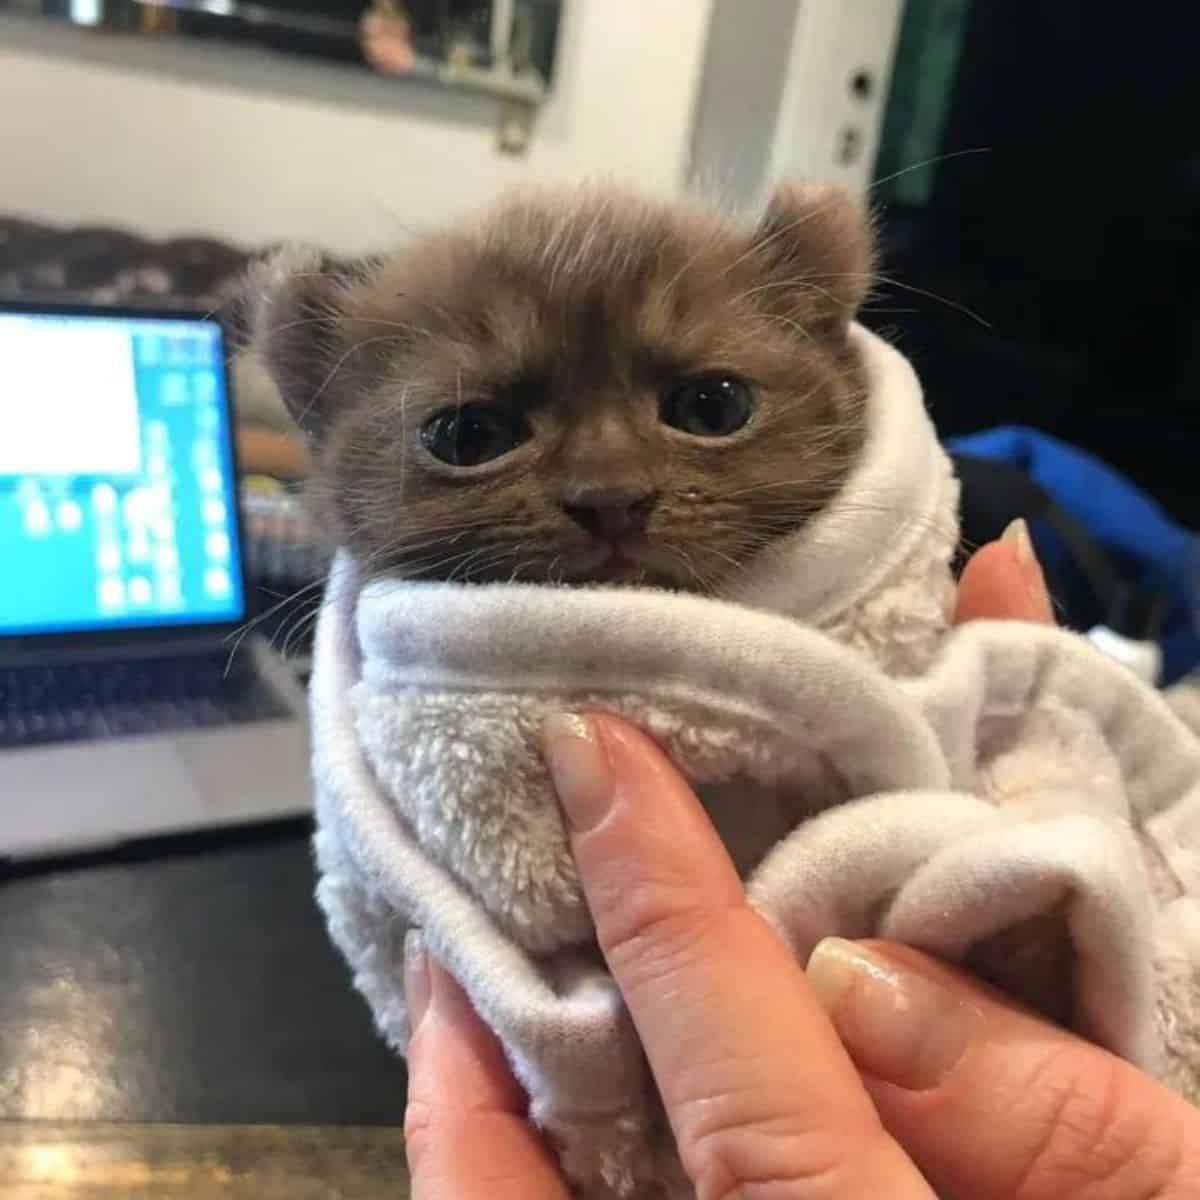 quill the kitten in a blanket